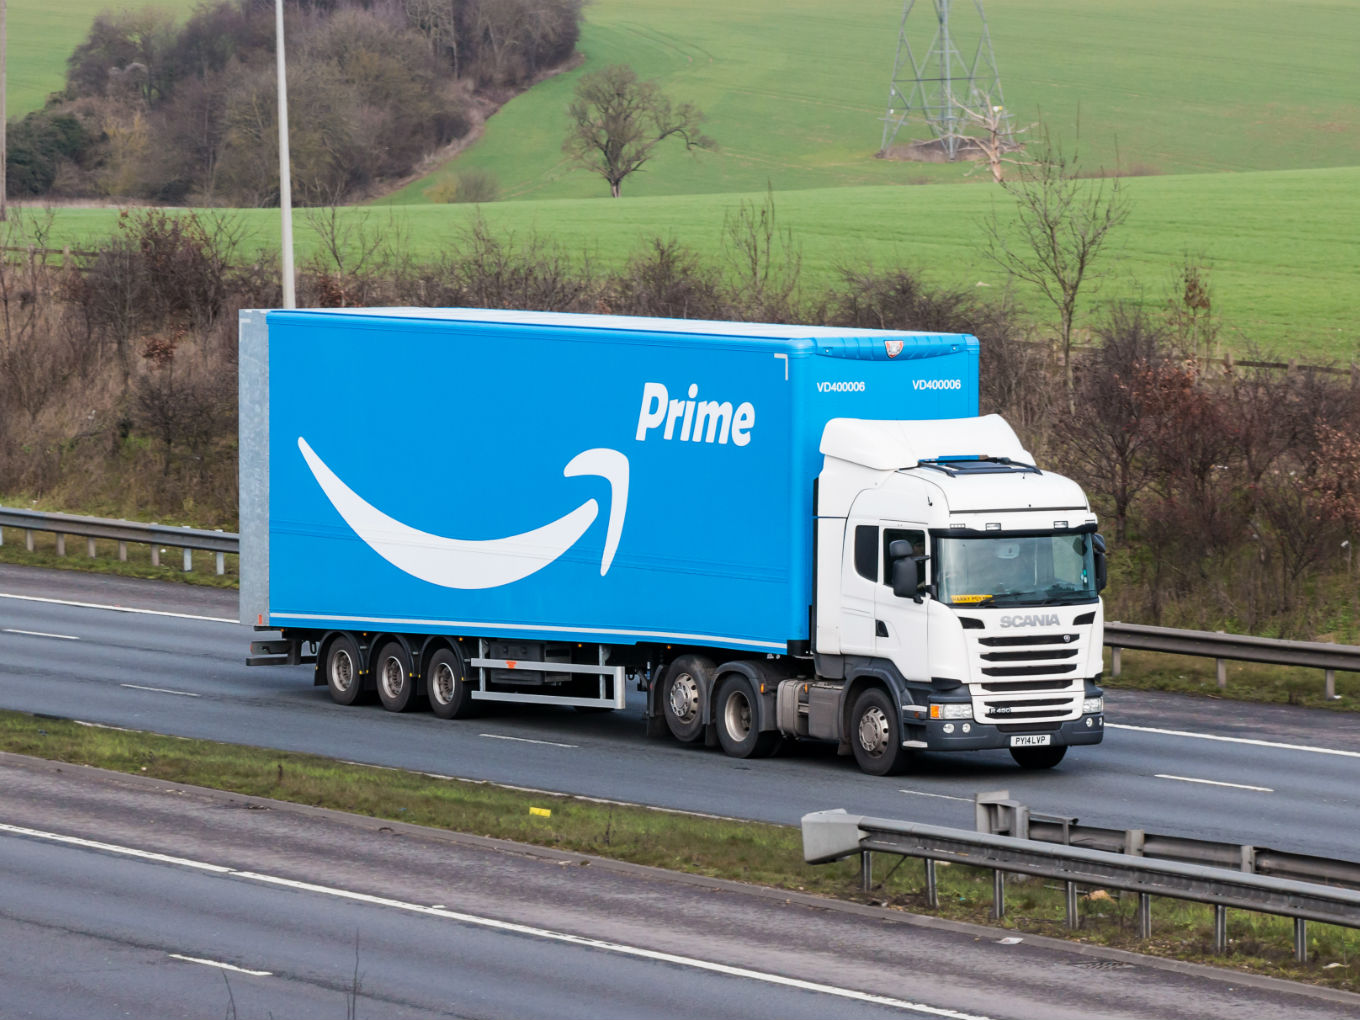 Ease Of One-Day Delivery By Amazon Increased Expectations: Morgan Stanley